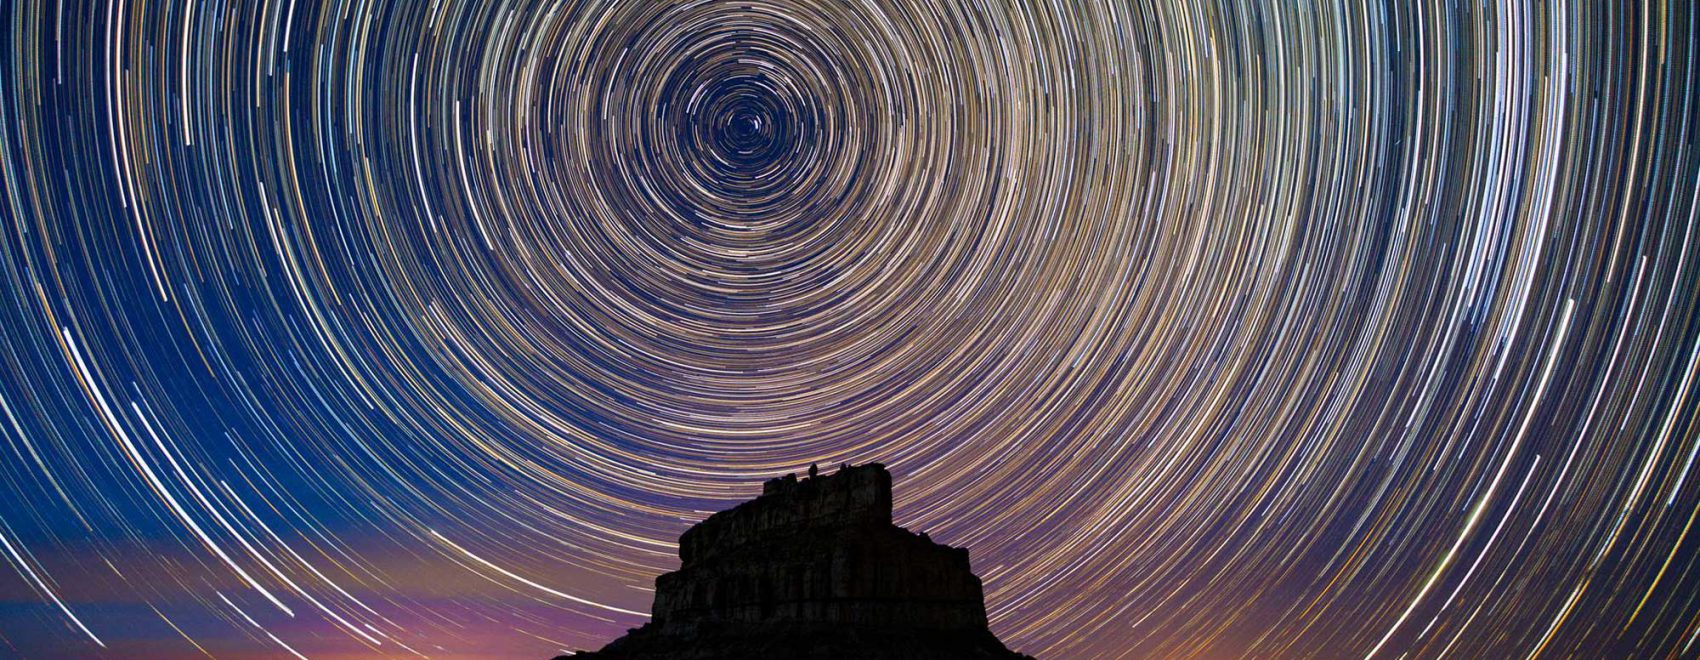 Time-lapse image of stars circling over Fajada Butte | NPS Photo by B. Davis